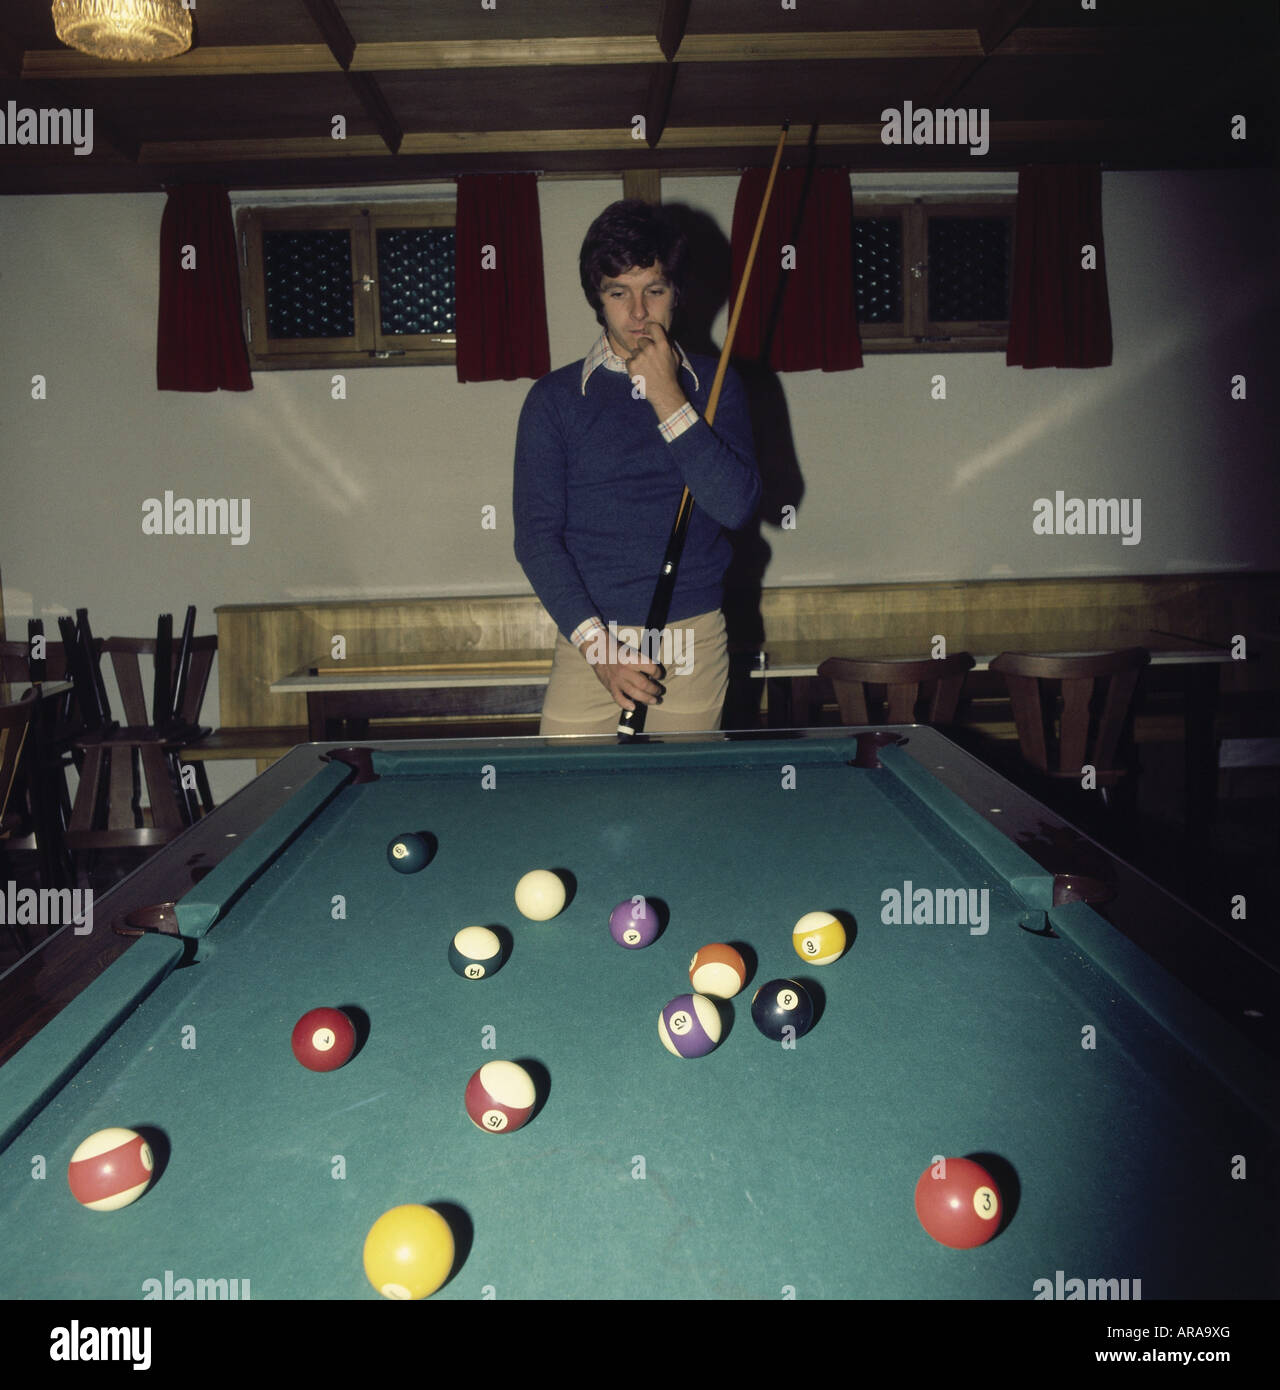 Schanze, Michael, * 15.1.1947, German moderator and singer, half length, in front of billiard table, 1970s, Stock Photo